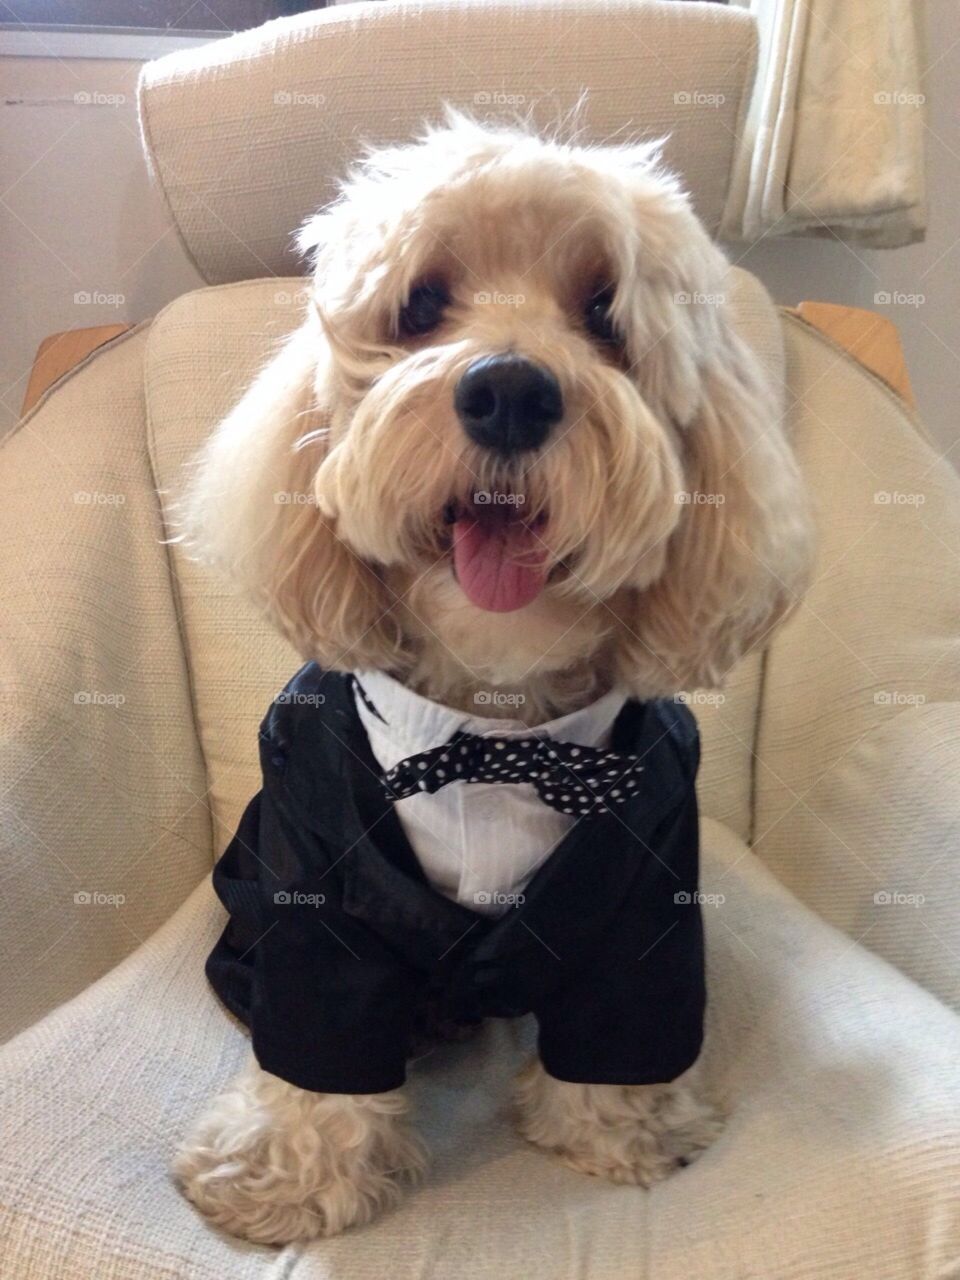 Doggie night out. Latte the dog in a tux